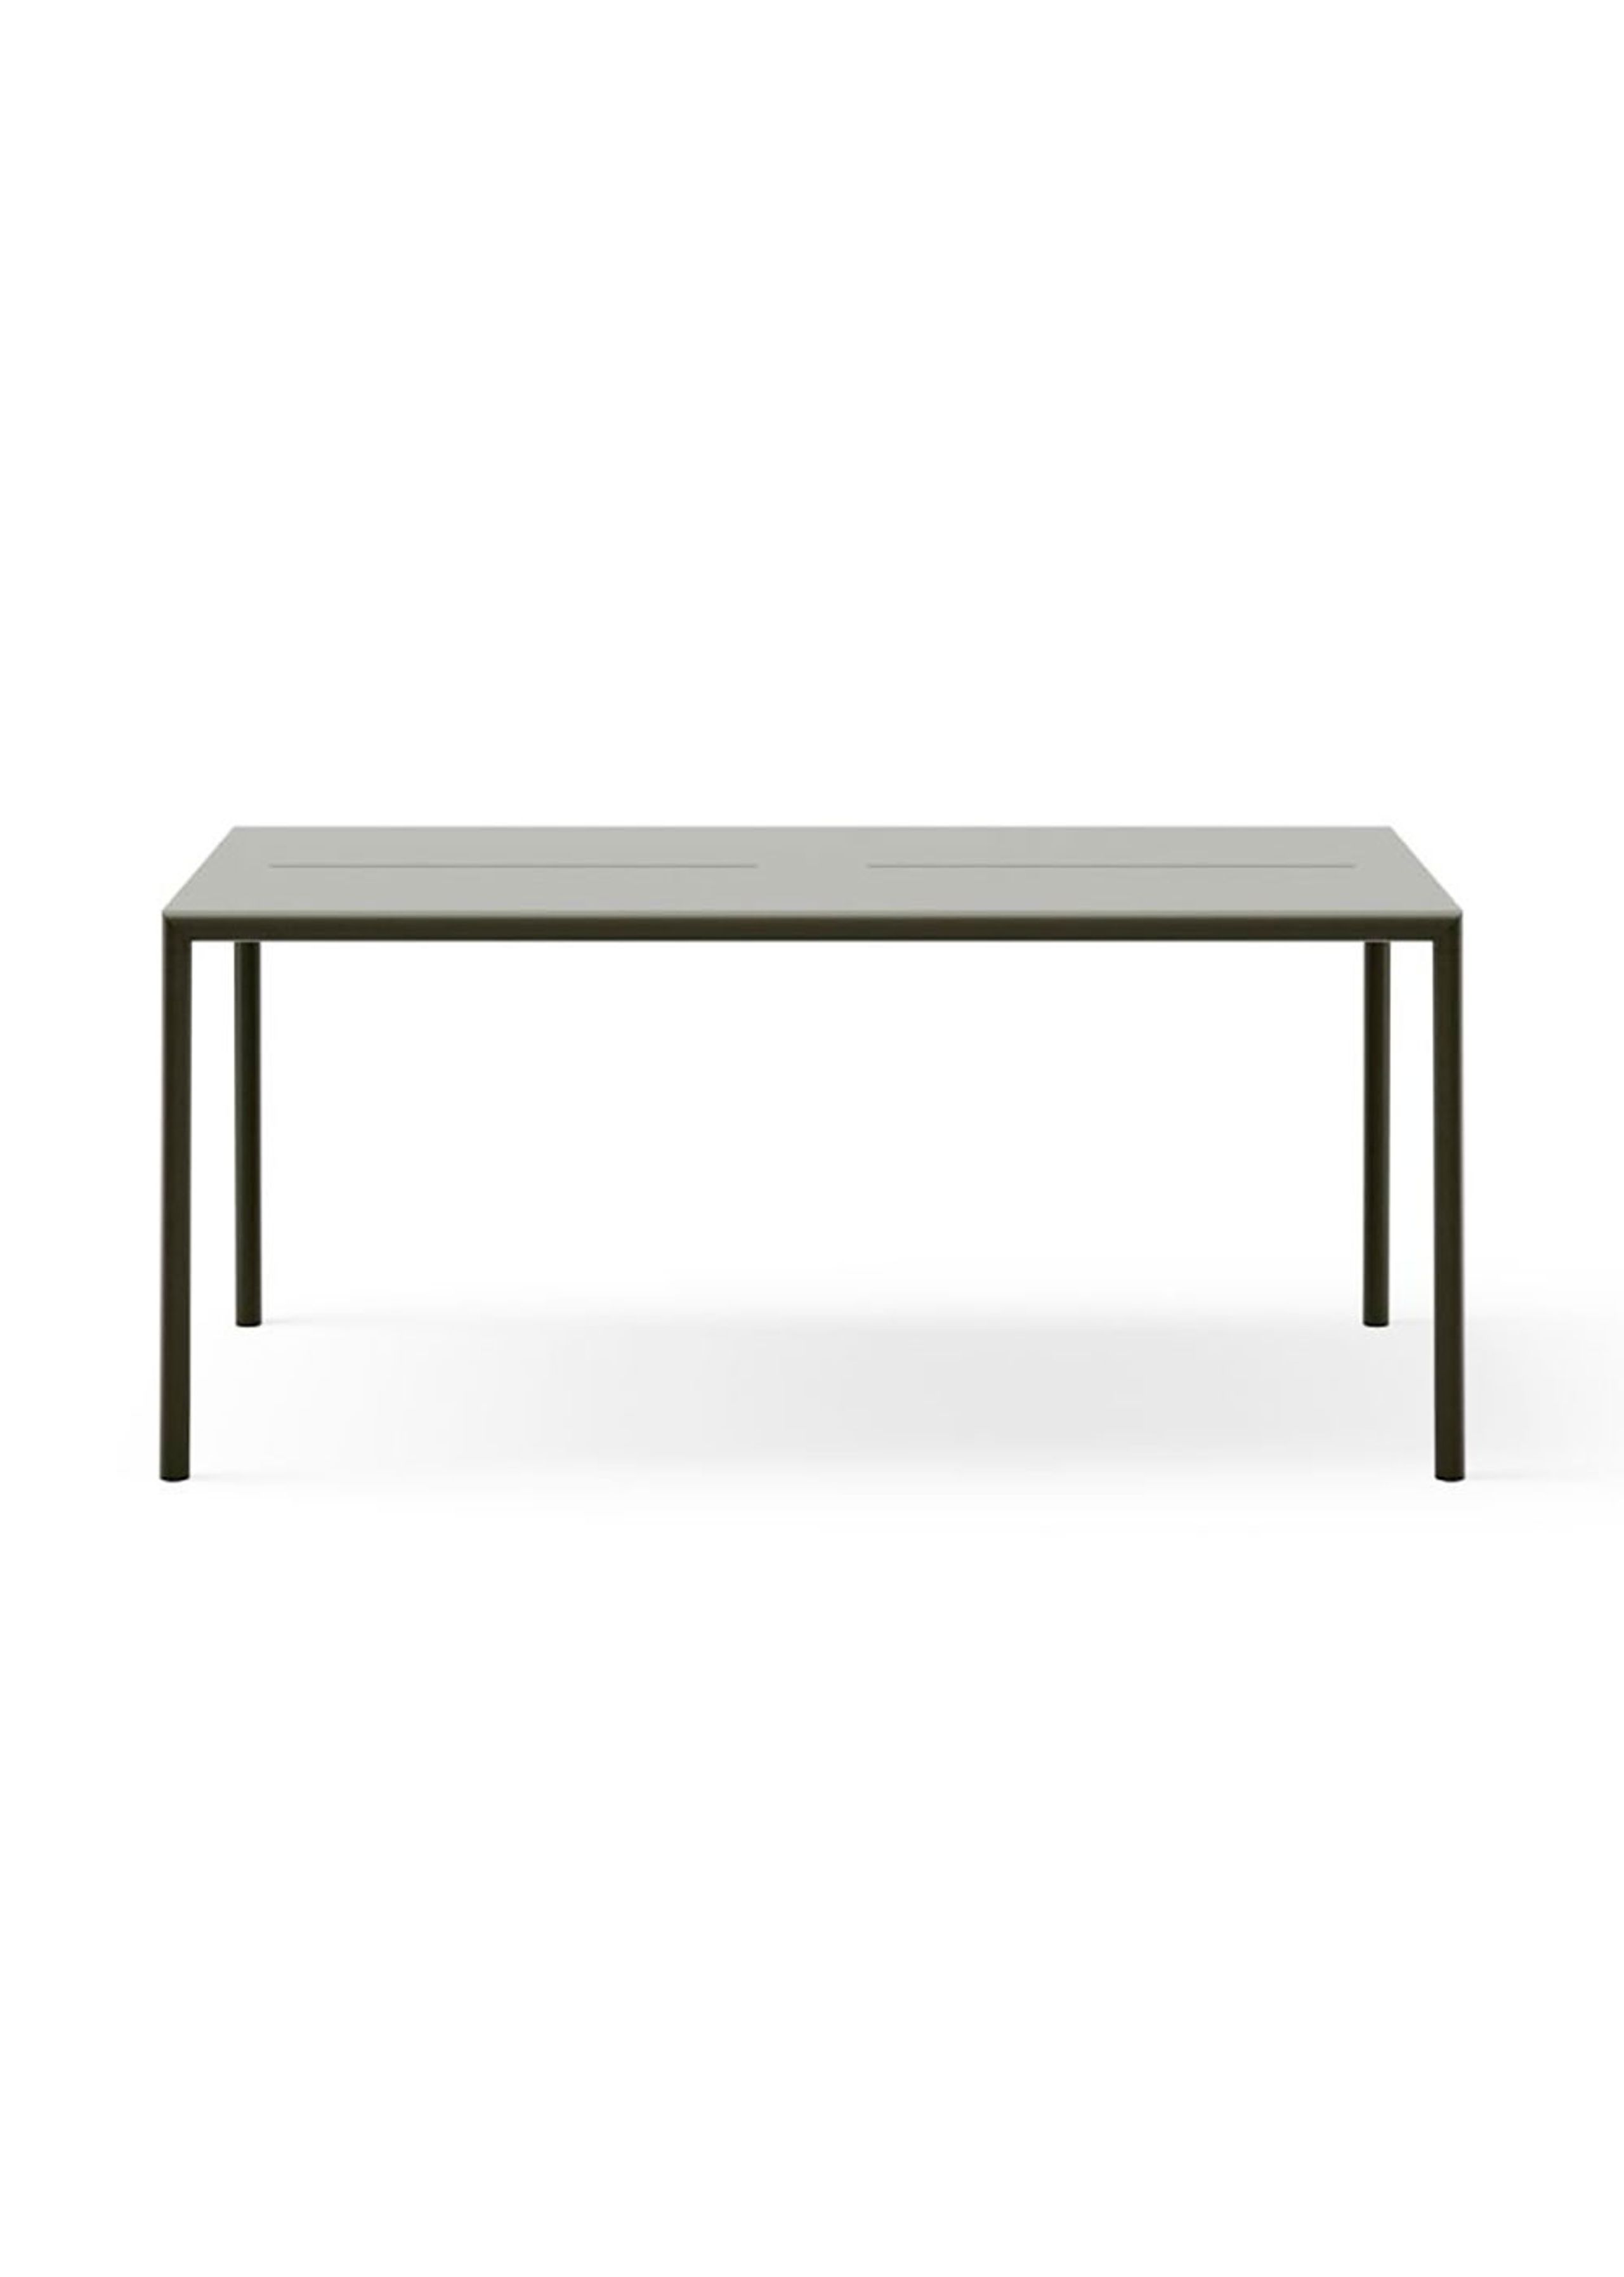 New Works - Havebord - May Table - Dark Green - Large